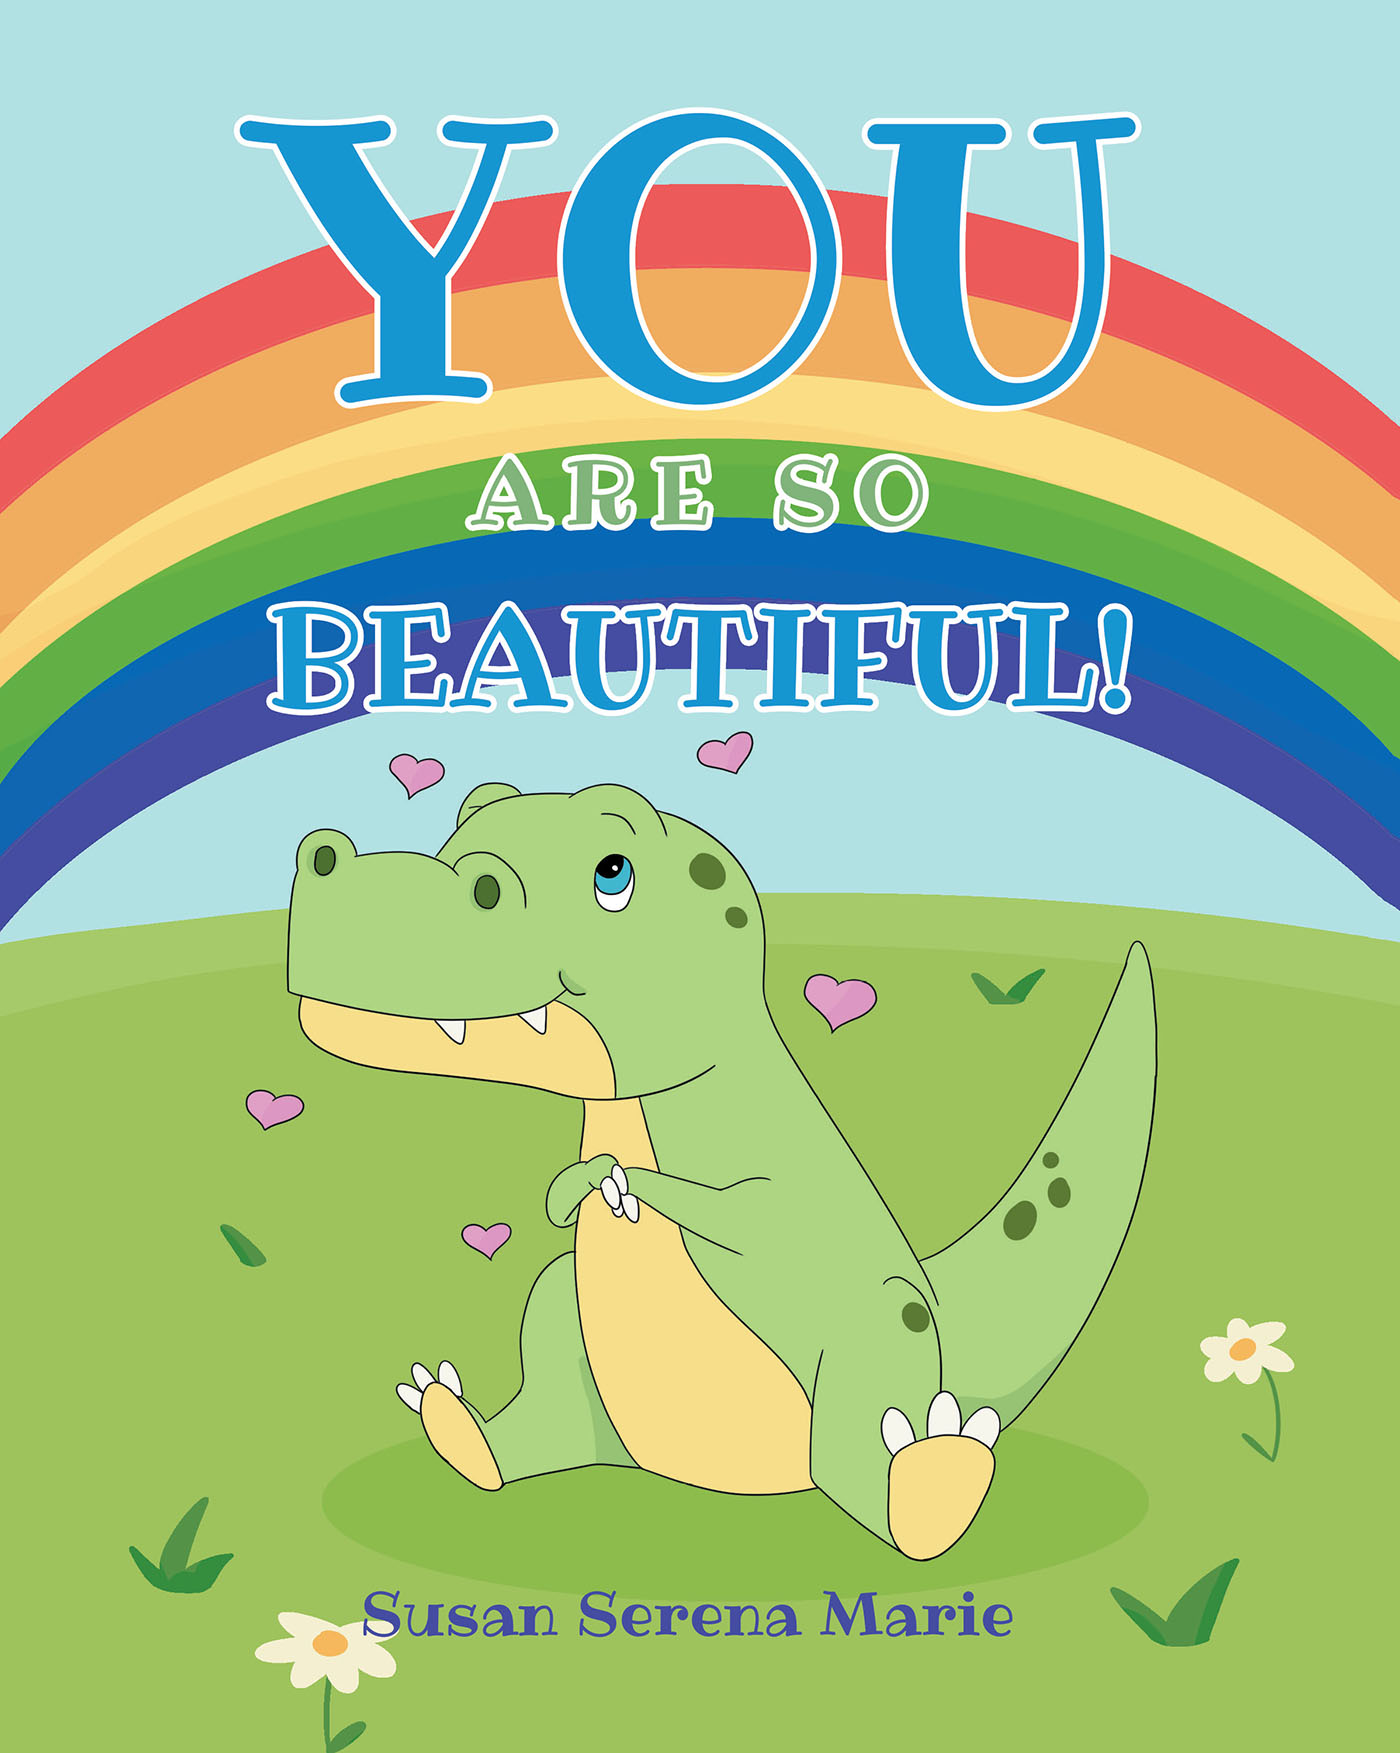 Susan Serena Marie’s New Book, "You Are So Beautiful!" is an Inspiring Children’s Story About Seeing One’s True Beauty Through God’s Love and Being Made in His Image